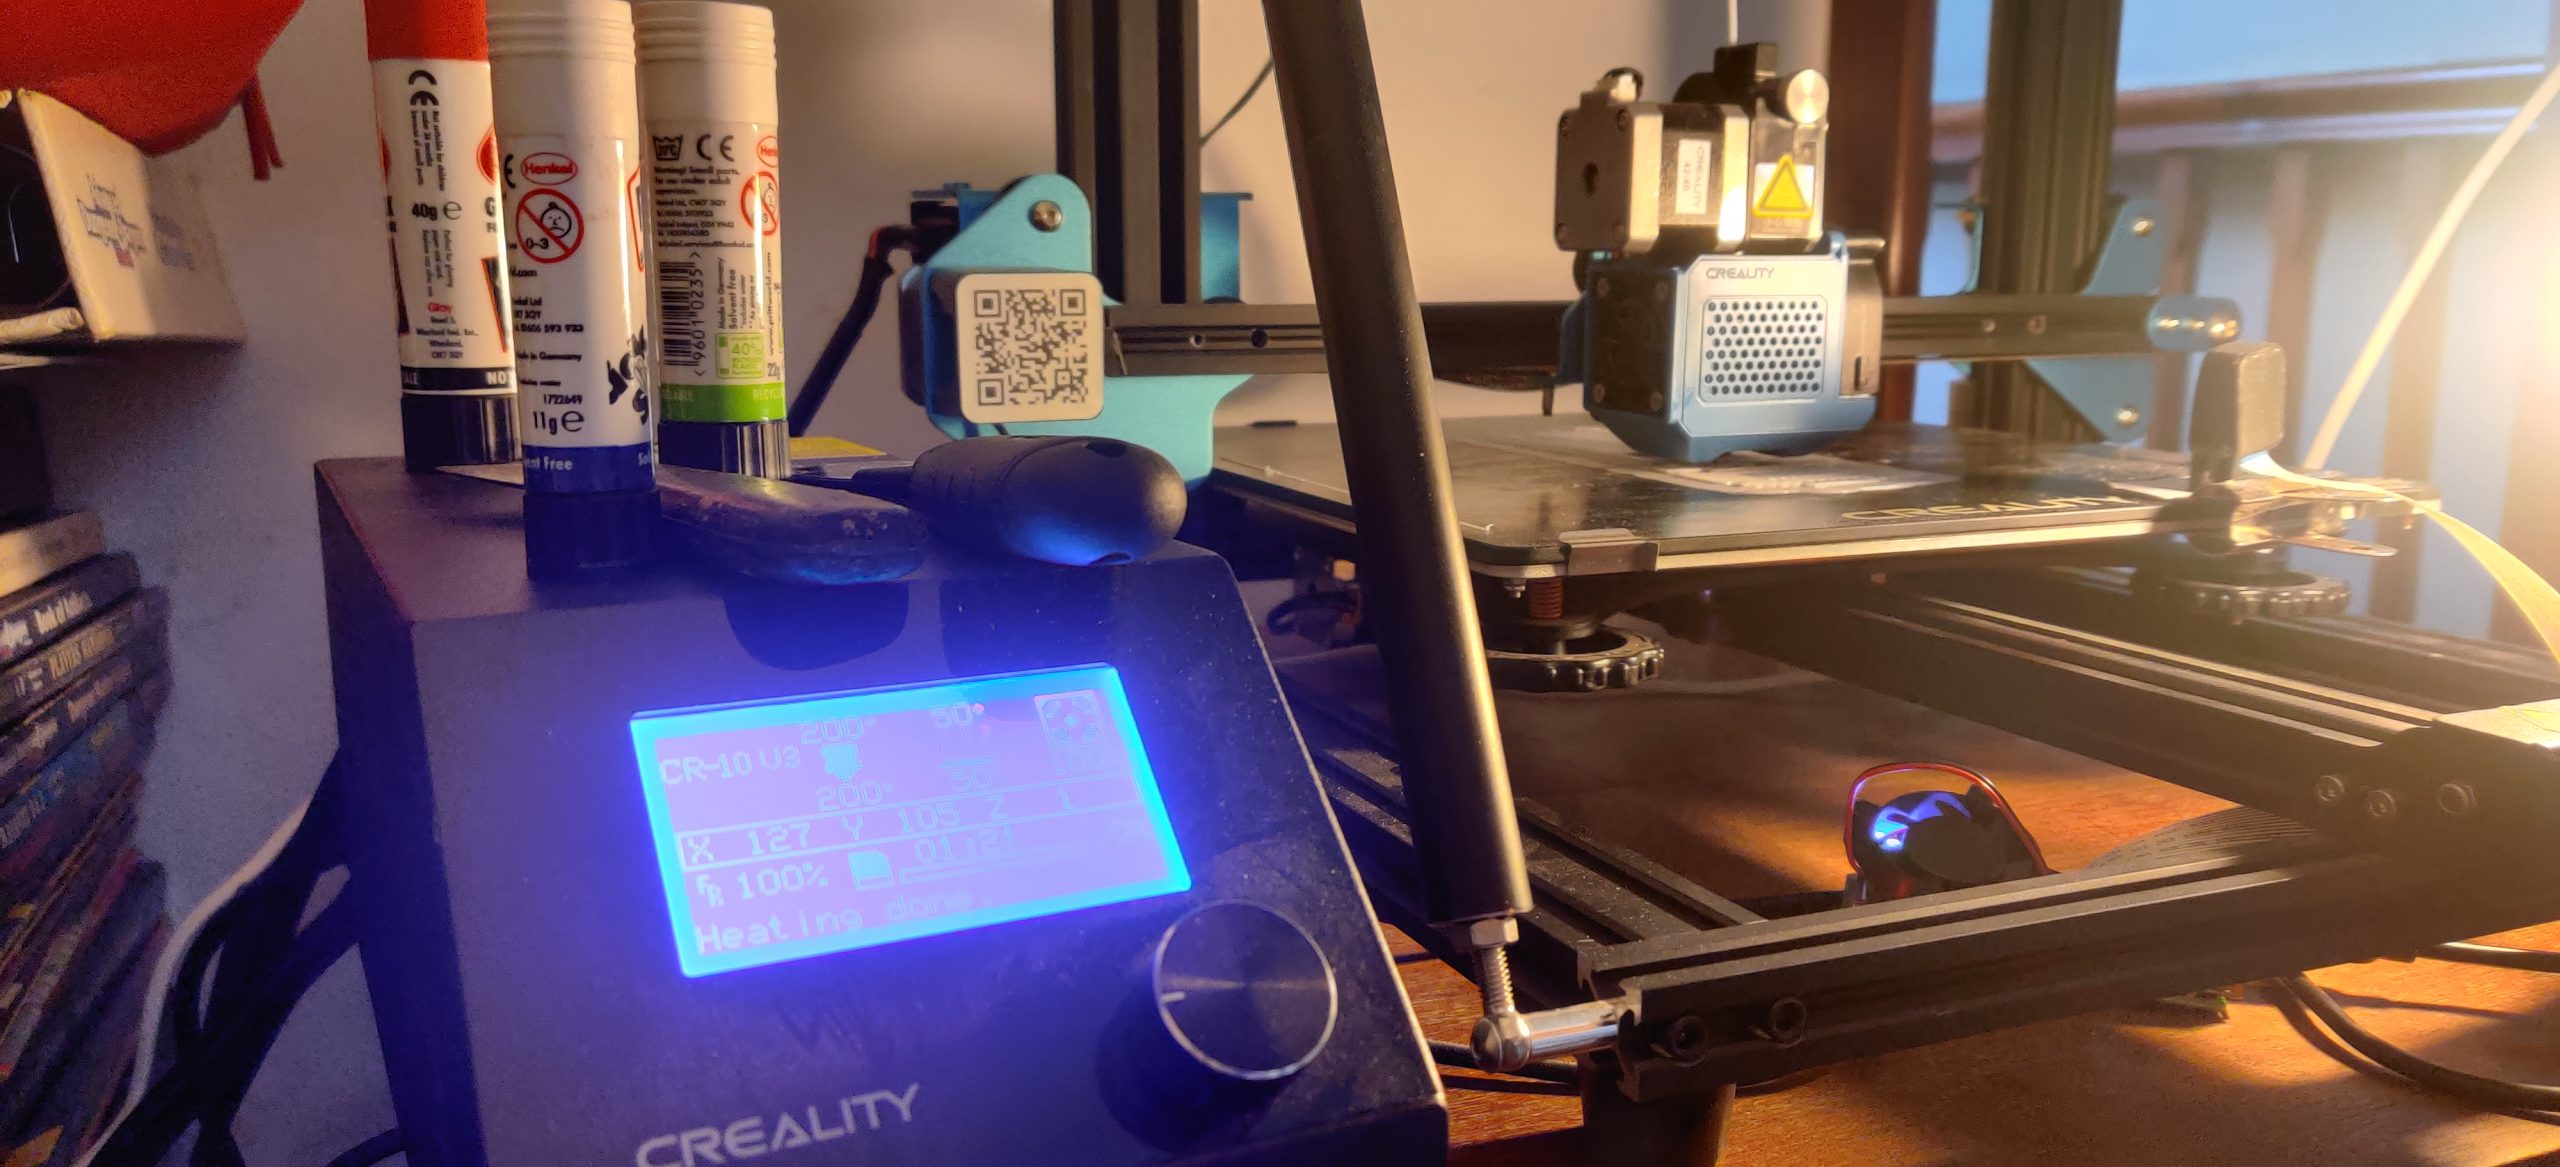 A 3D printer with its controller.